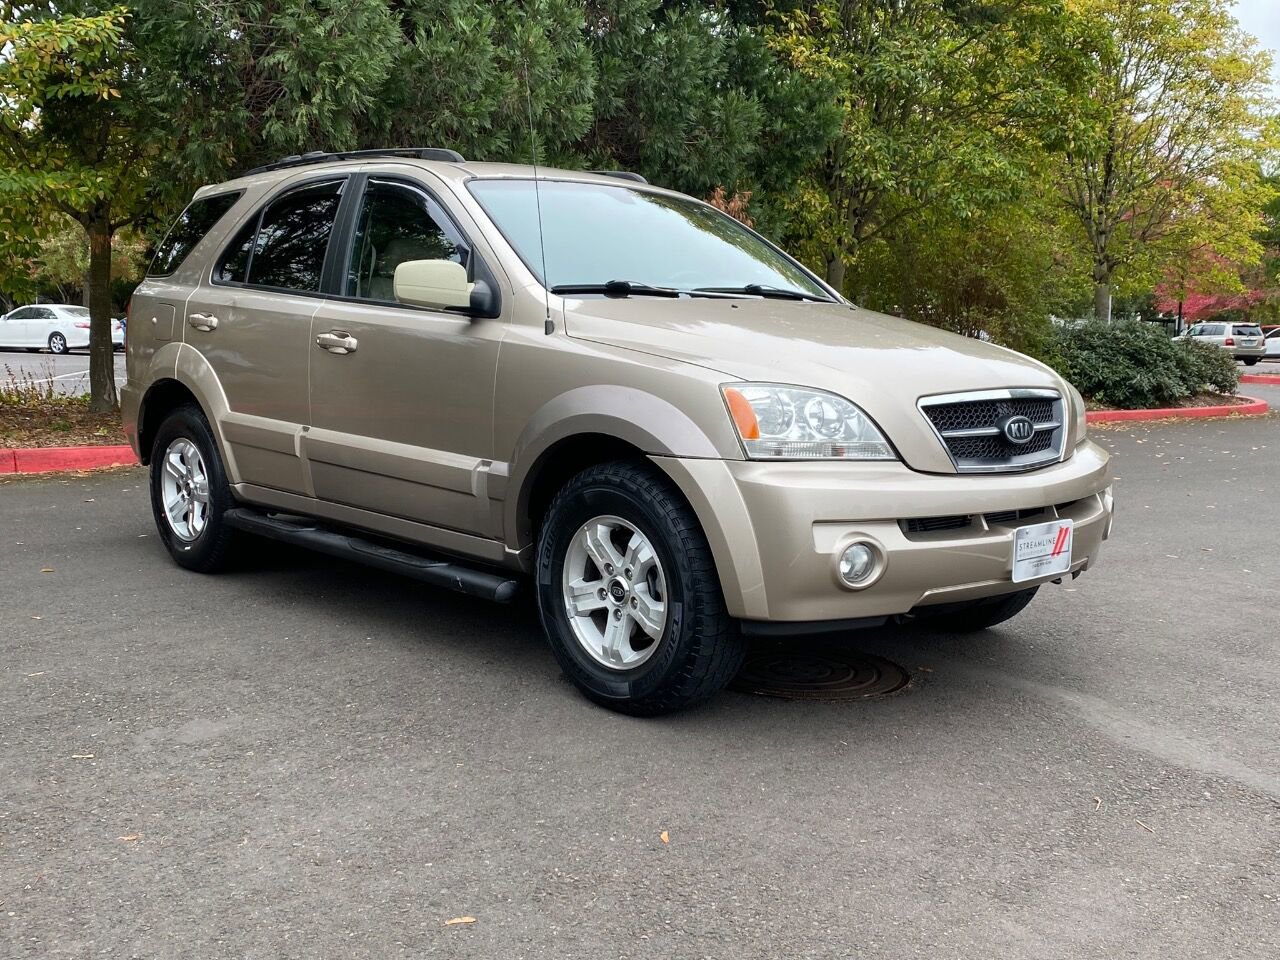 Used 2004 Kia Sorento for Sale in San Jose, CA (Test Drive at Home) -  Kelley Blue Book